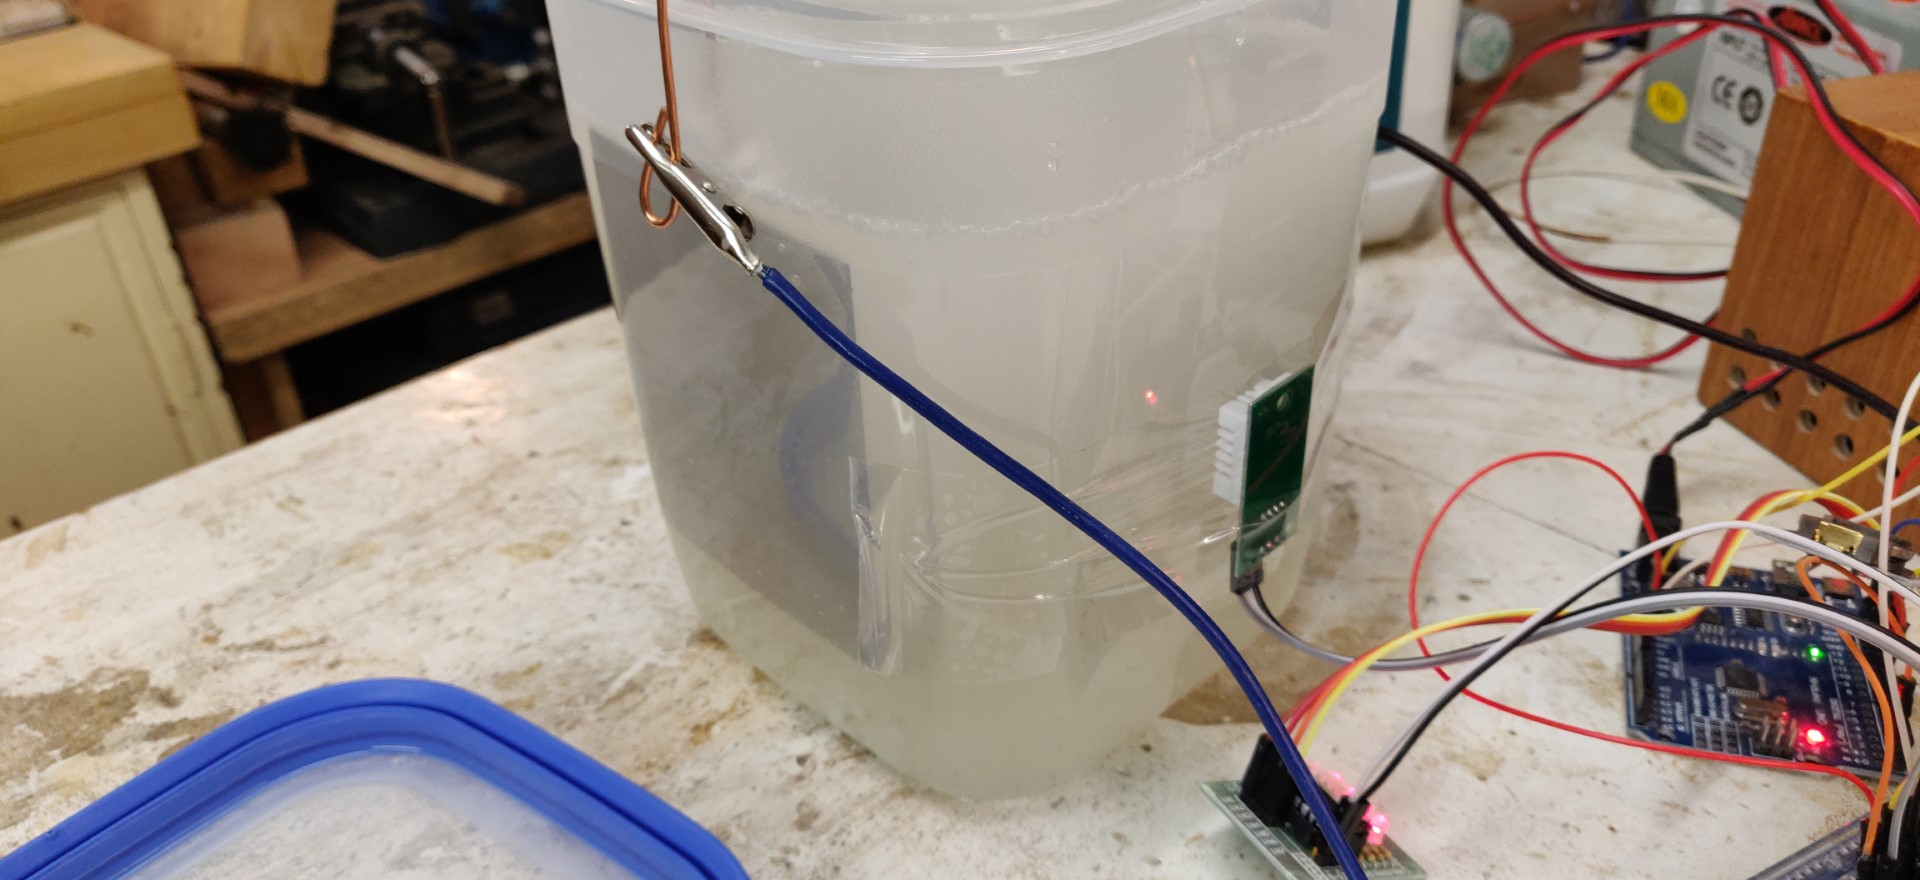 The nickel electrodes are soldered to a copper wire and placed on either side of the tank. 